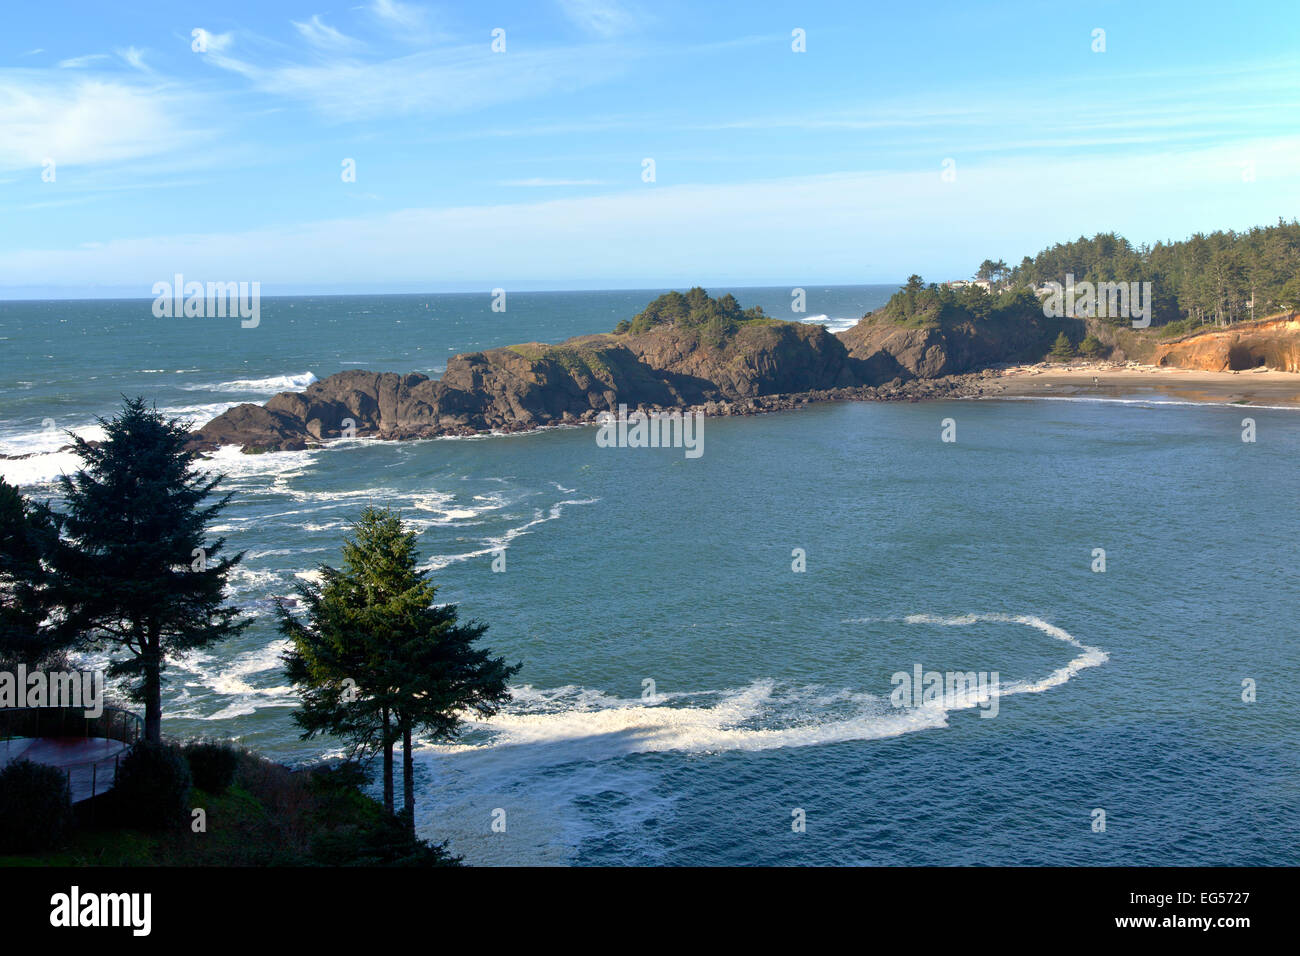 Oregon coast rocks and cliffs water inlet. Stock Photo